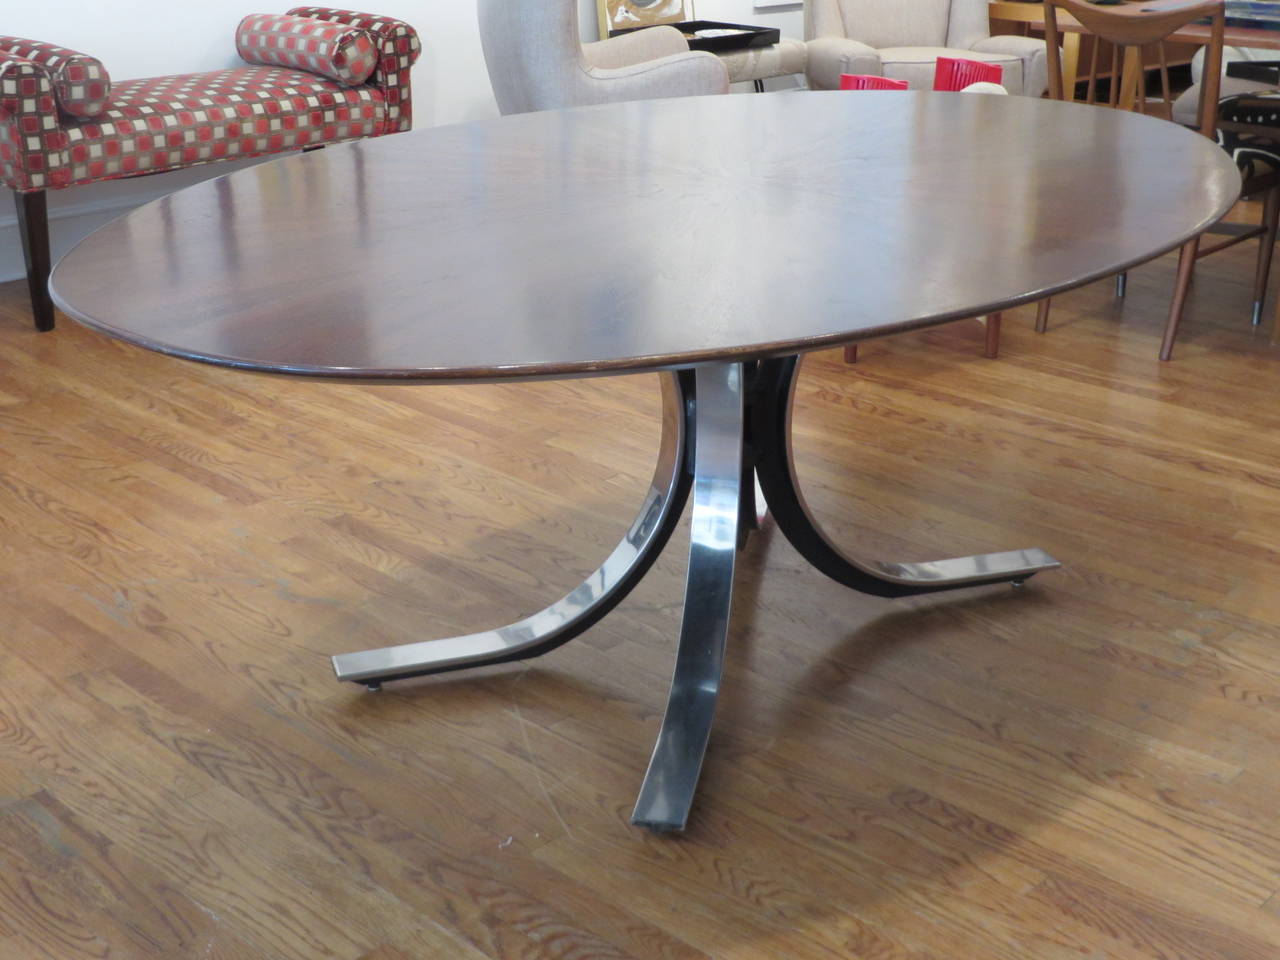 Dining or conference table designed by Osvaldo Borsani for Stow Davis. The tabletop has a bookmatched sunburst pattern with a knife edged bevel. The base is polished steel.